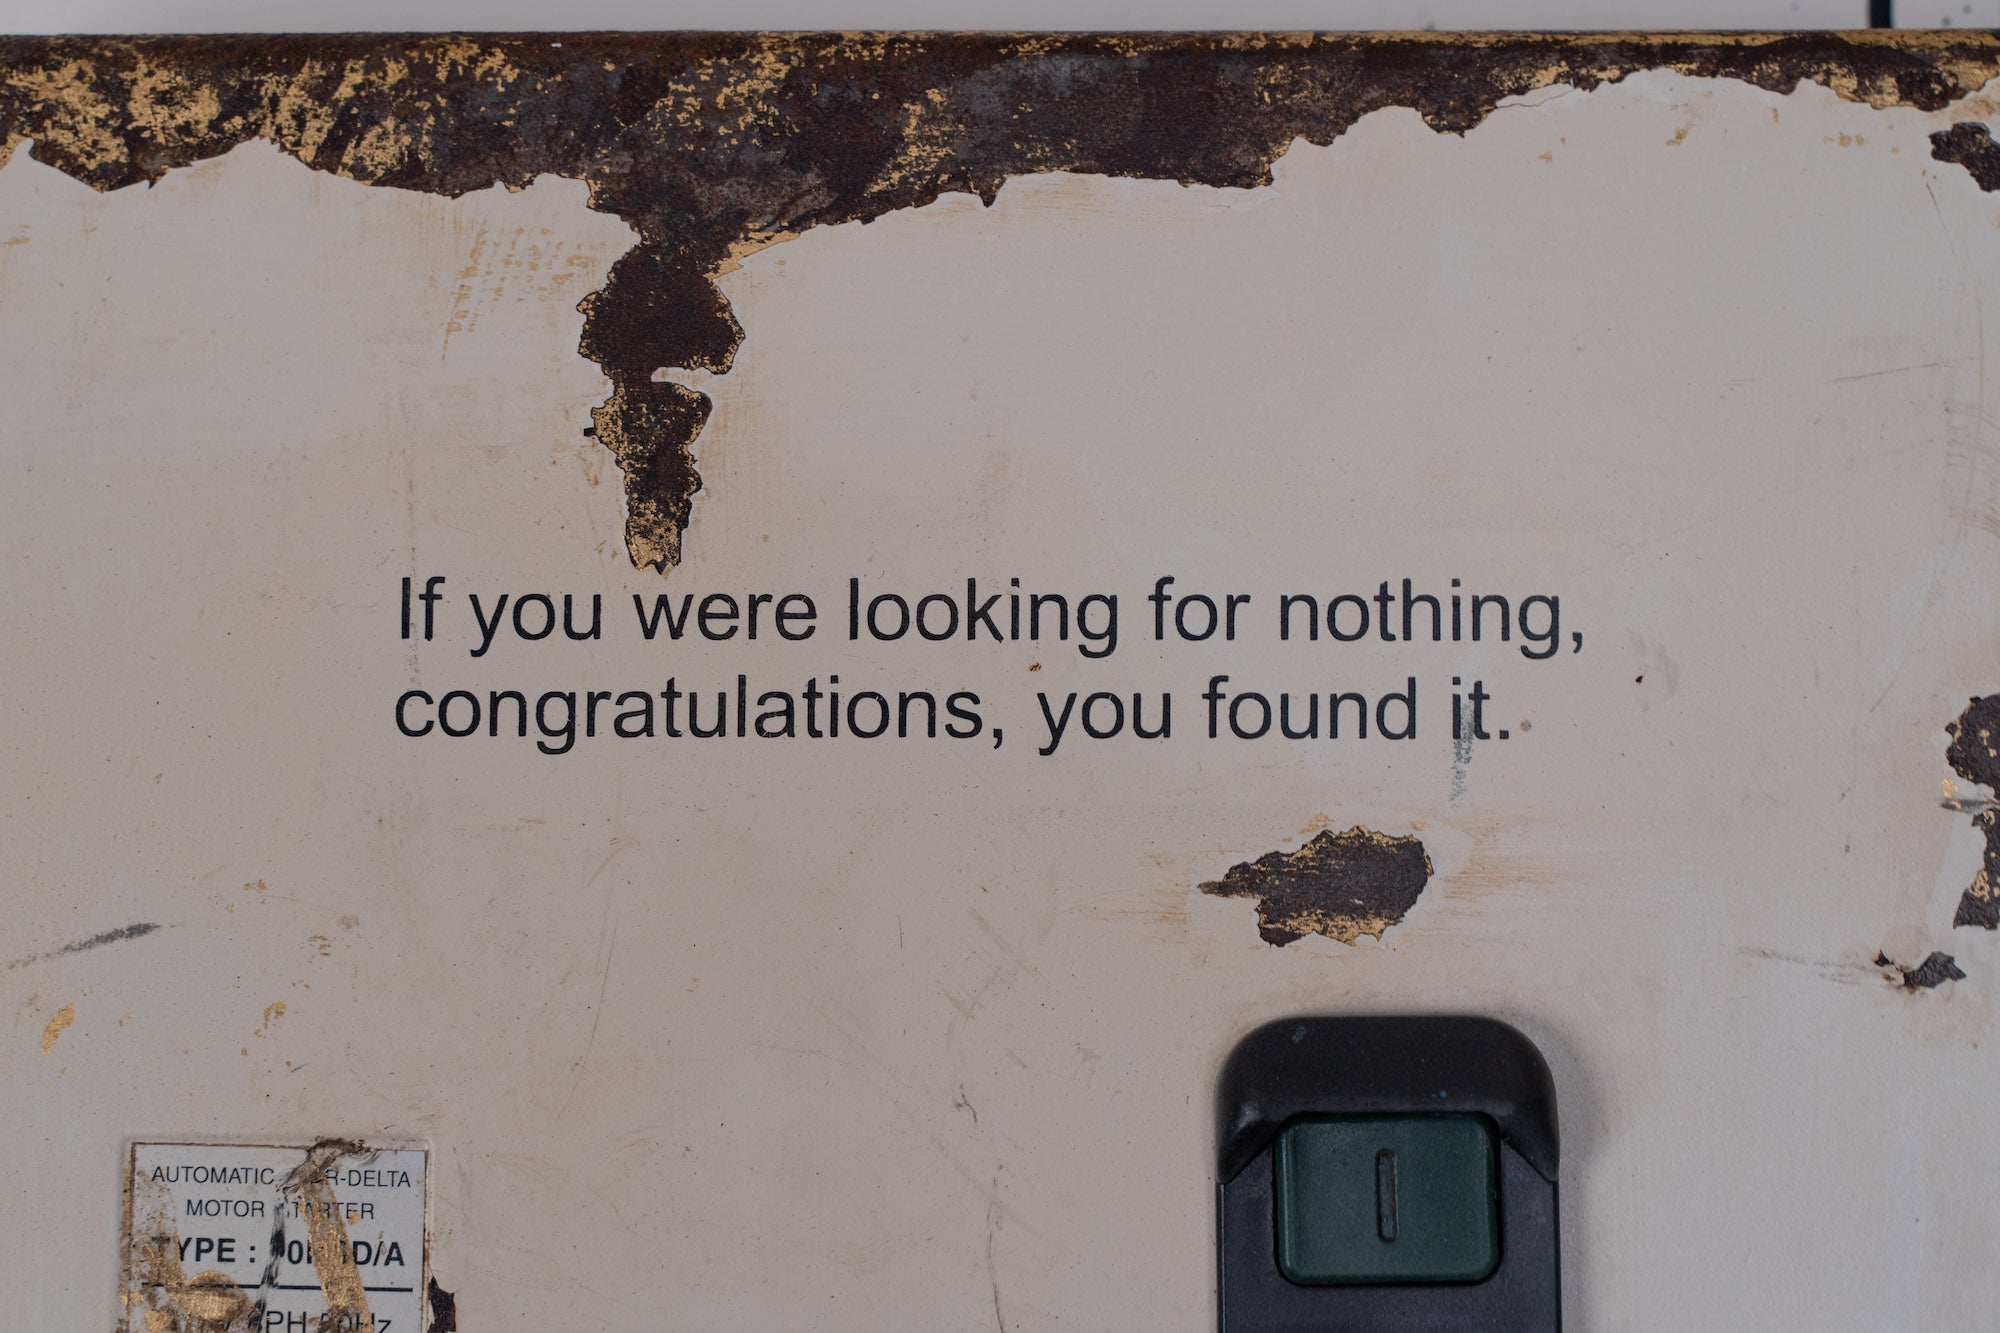 "If You're Looking For Nothing, Congratulations! You Found It" by Tyler